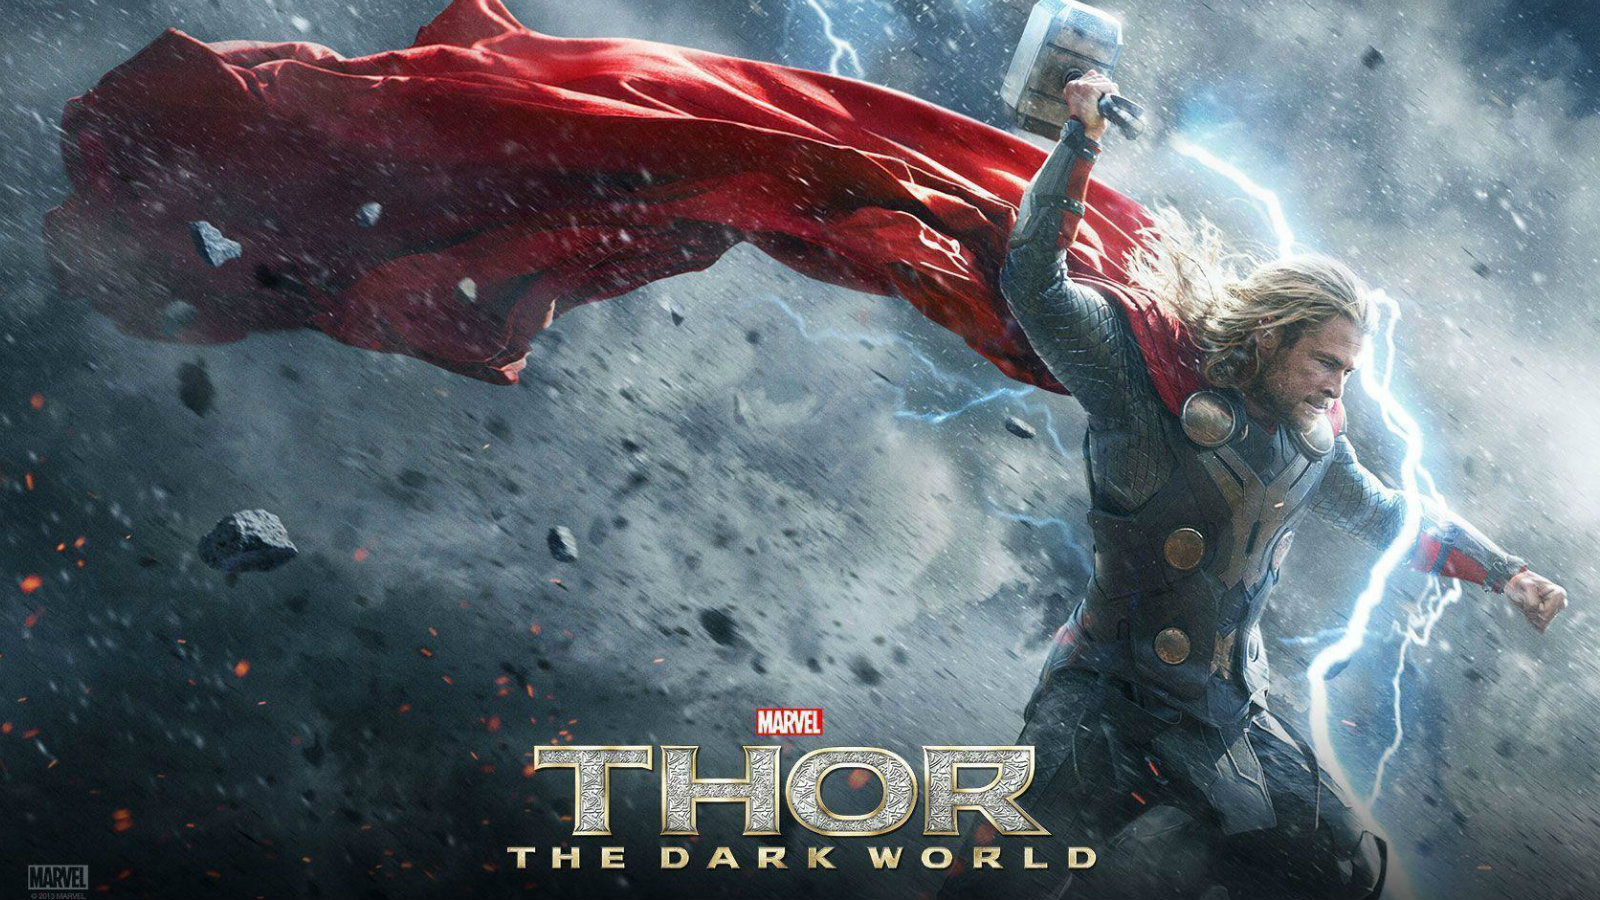 Thor The Dark World Image HD Wallpaper And